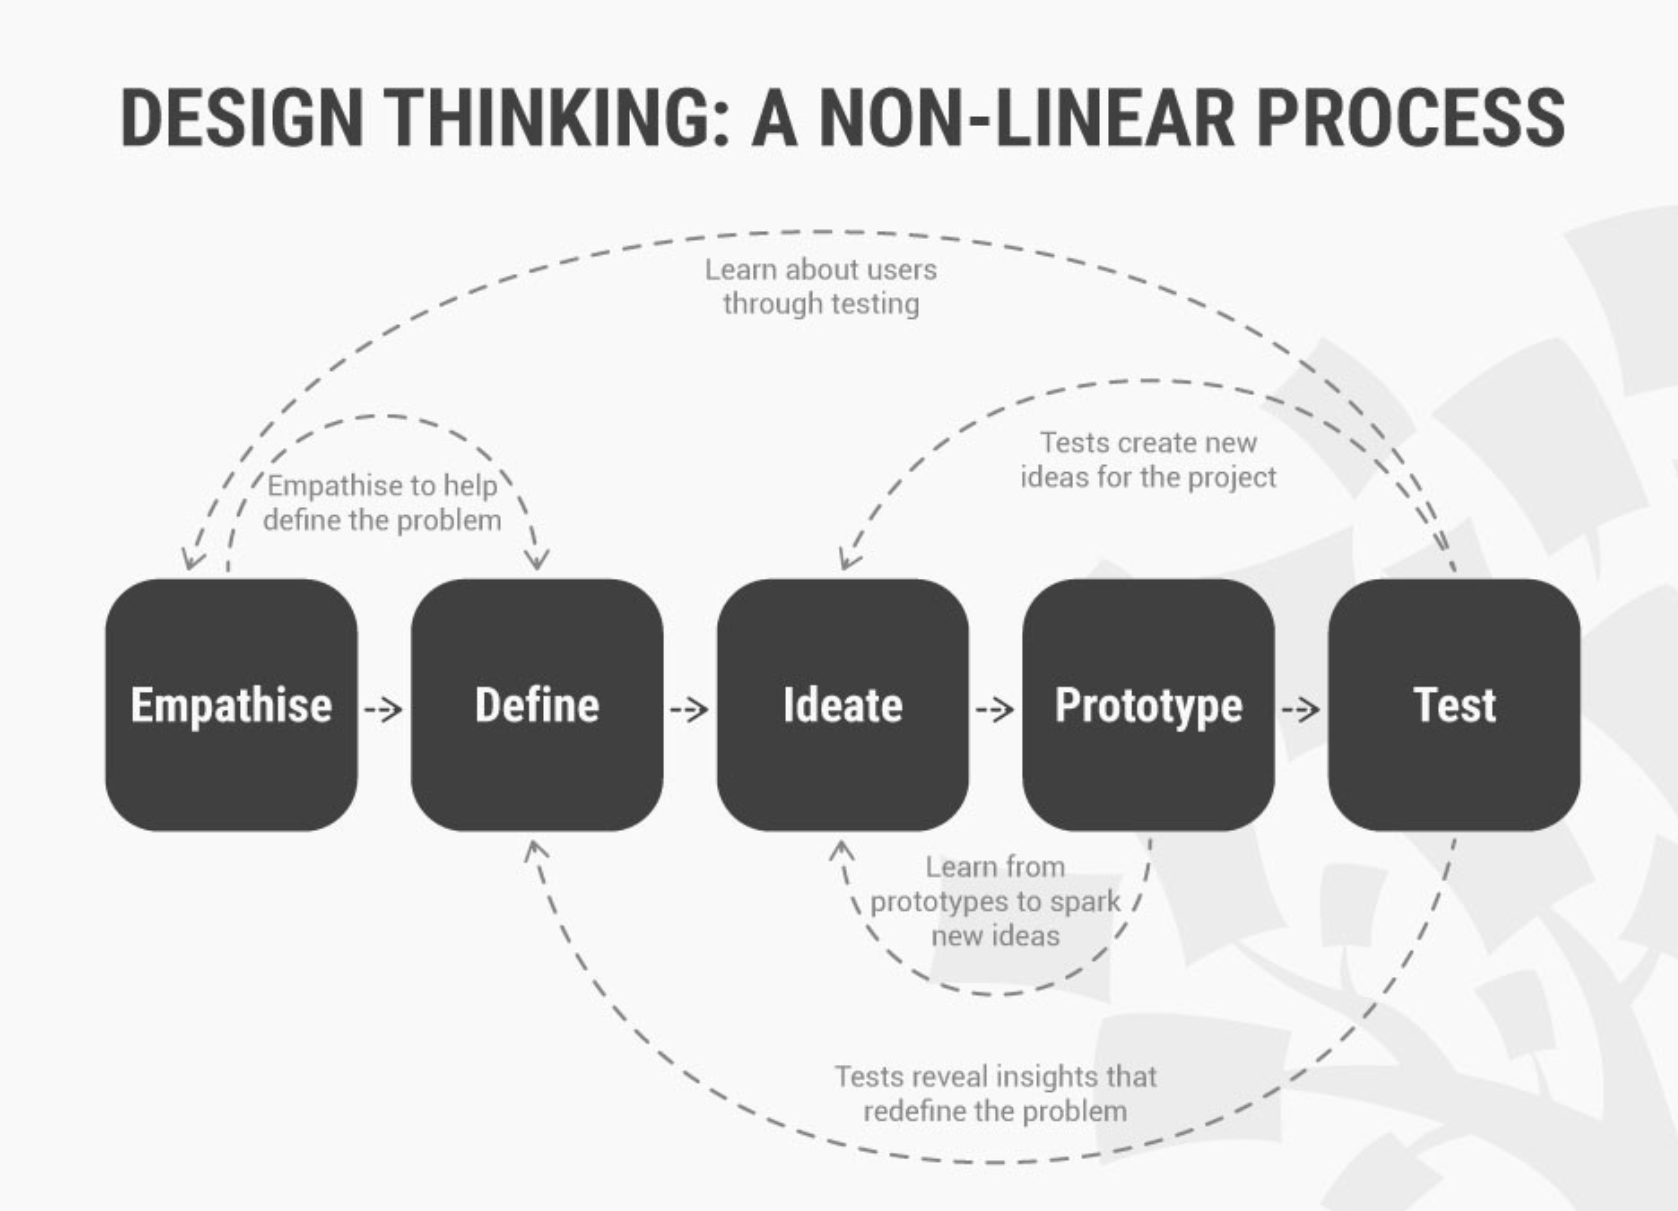 Image of the flow for Design Thinking Approach; starting from left to right are empathize, define, ideate, prototype, test